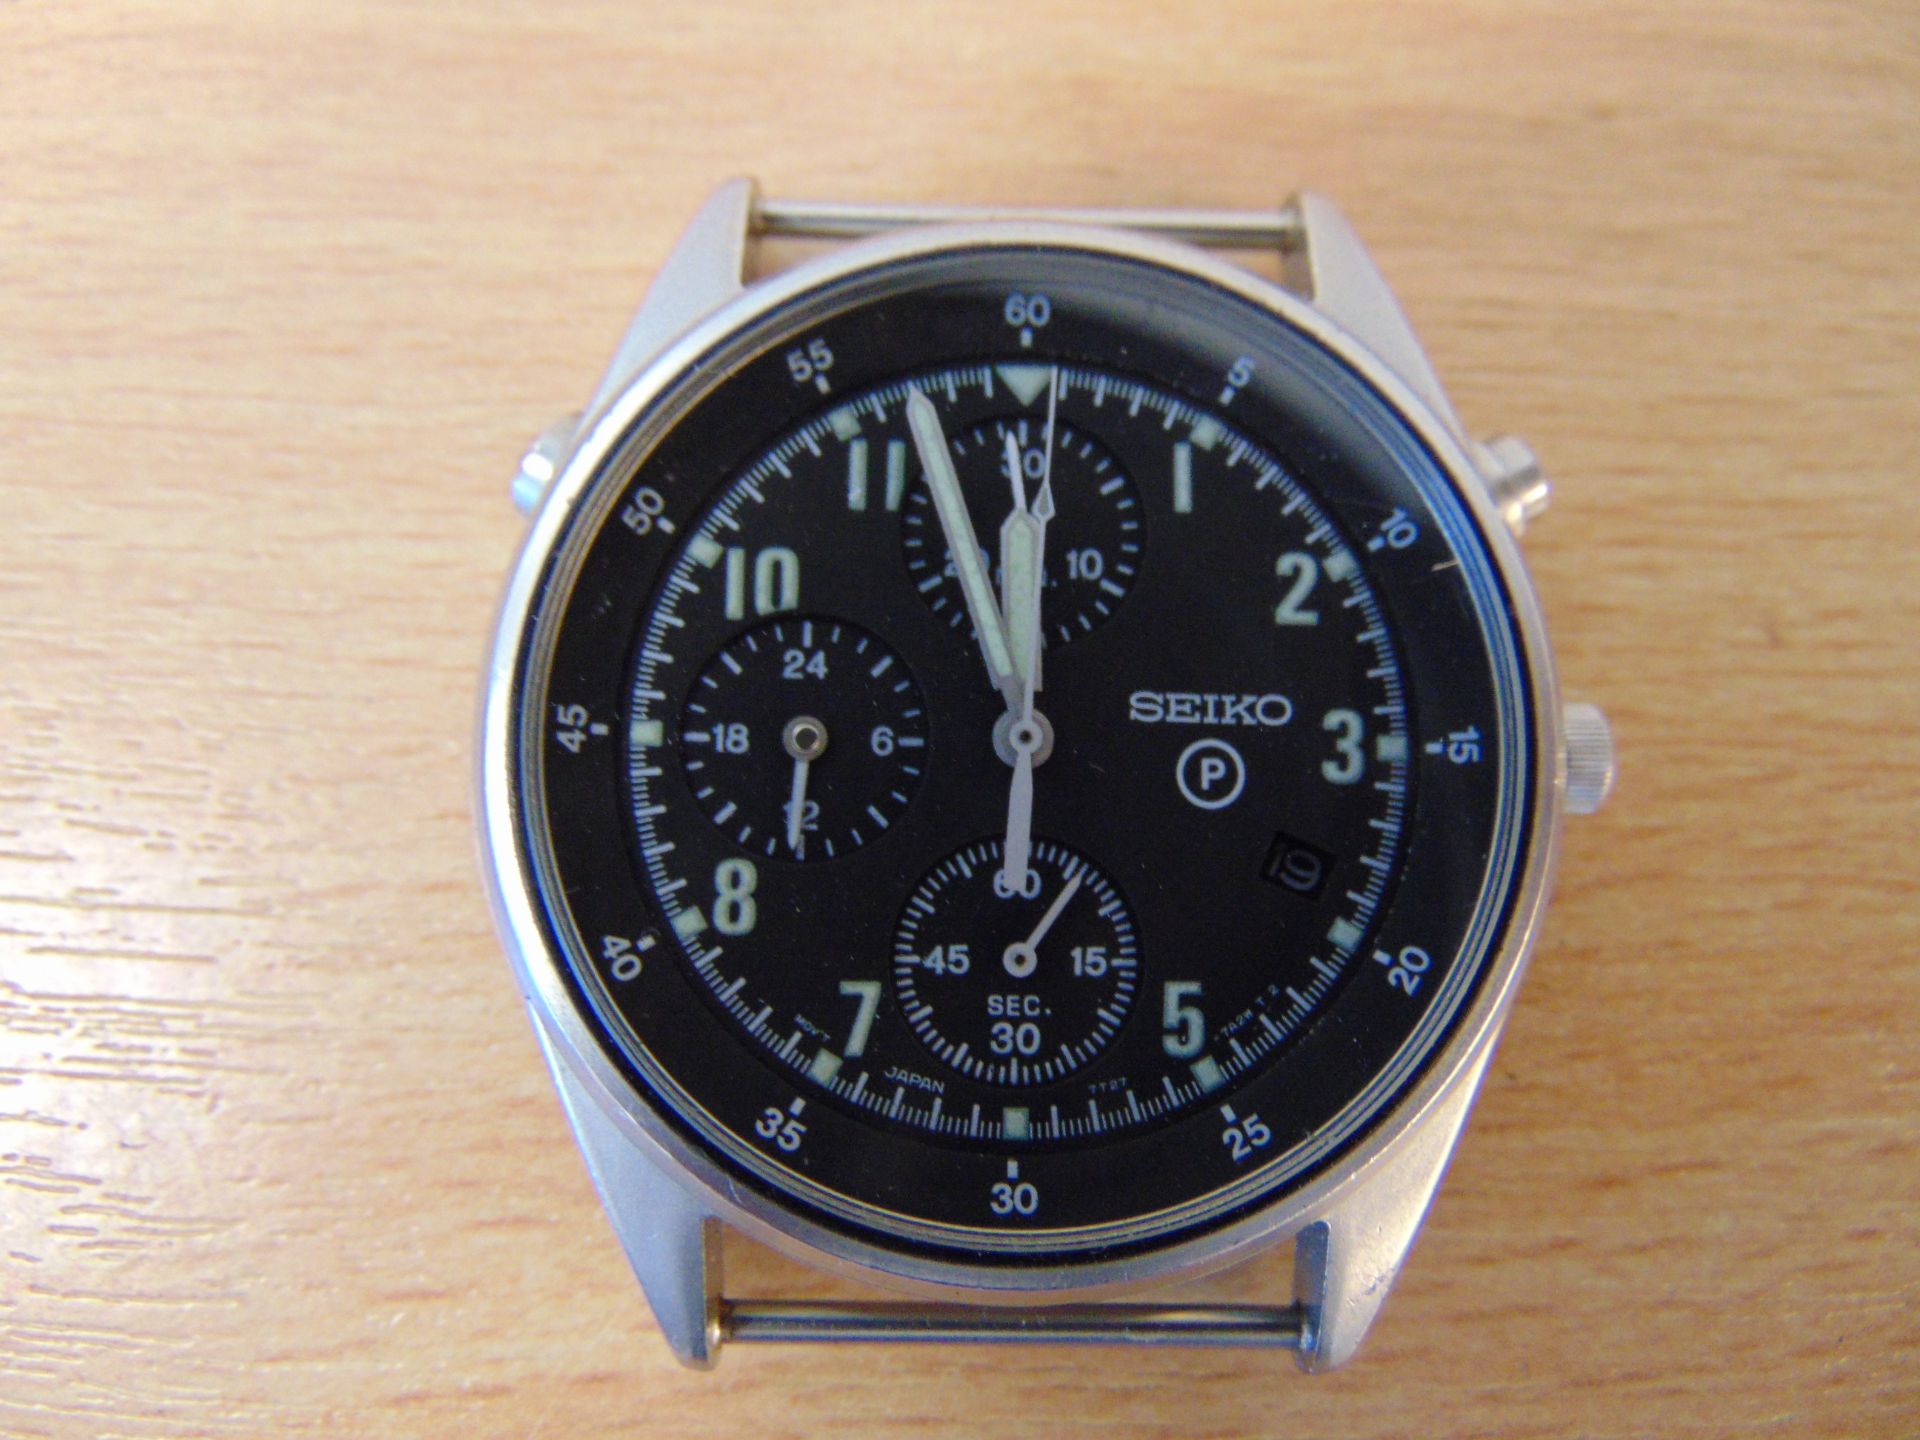 Seiko Gen 2 Pilots Chrono RAF issue Nato Marks, Date 1999 * Timer Button Missing, New Battery